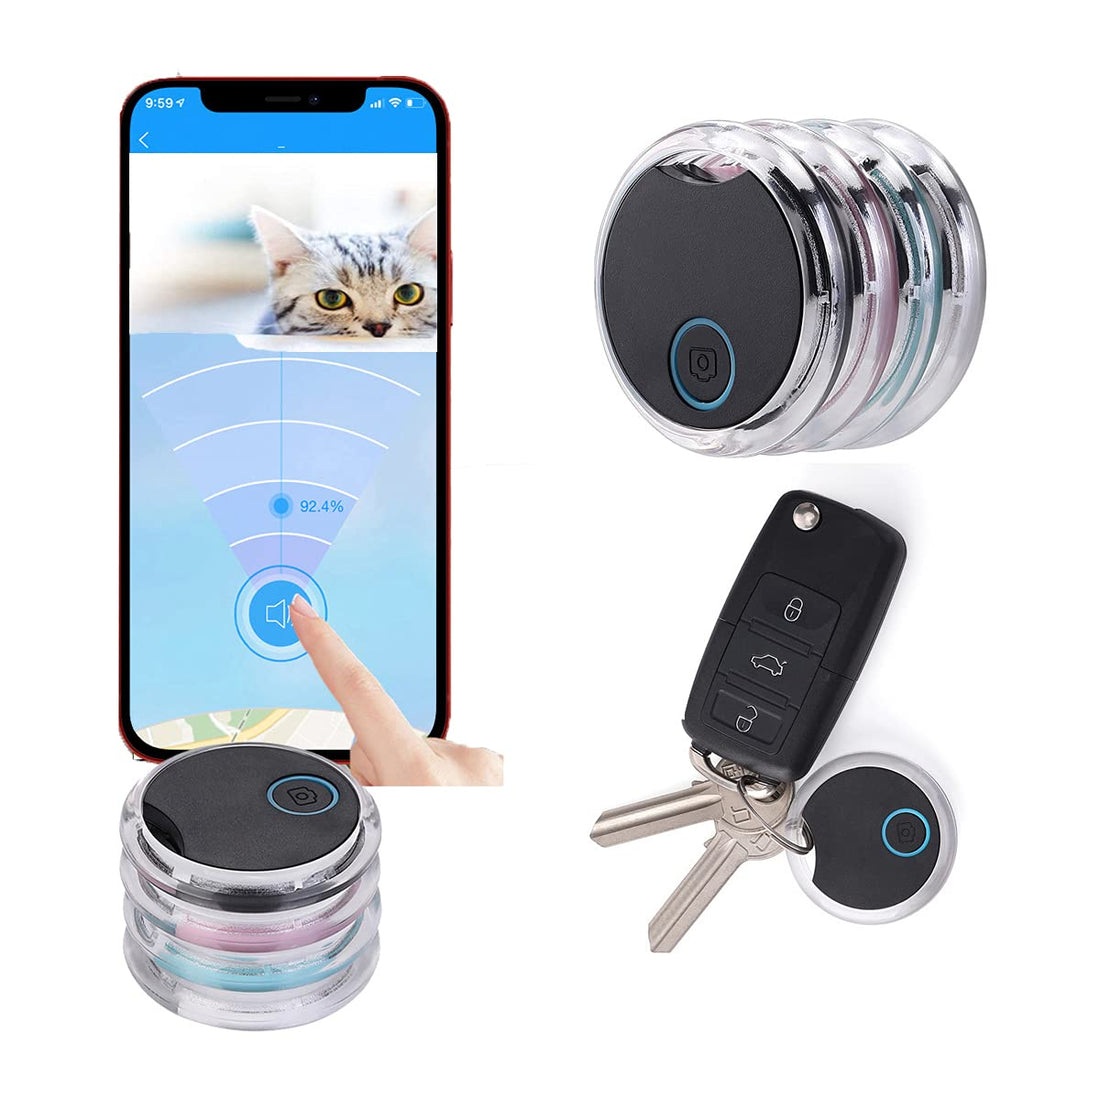 Wolmund 4 Pack Smart Bluetooth Tracker & Bluetooth Key Finder – Key Locator Device with App,GPS Tracking Device for Kids Pets Keychain Wallet Luggage,APP Control Compatible iOS Android